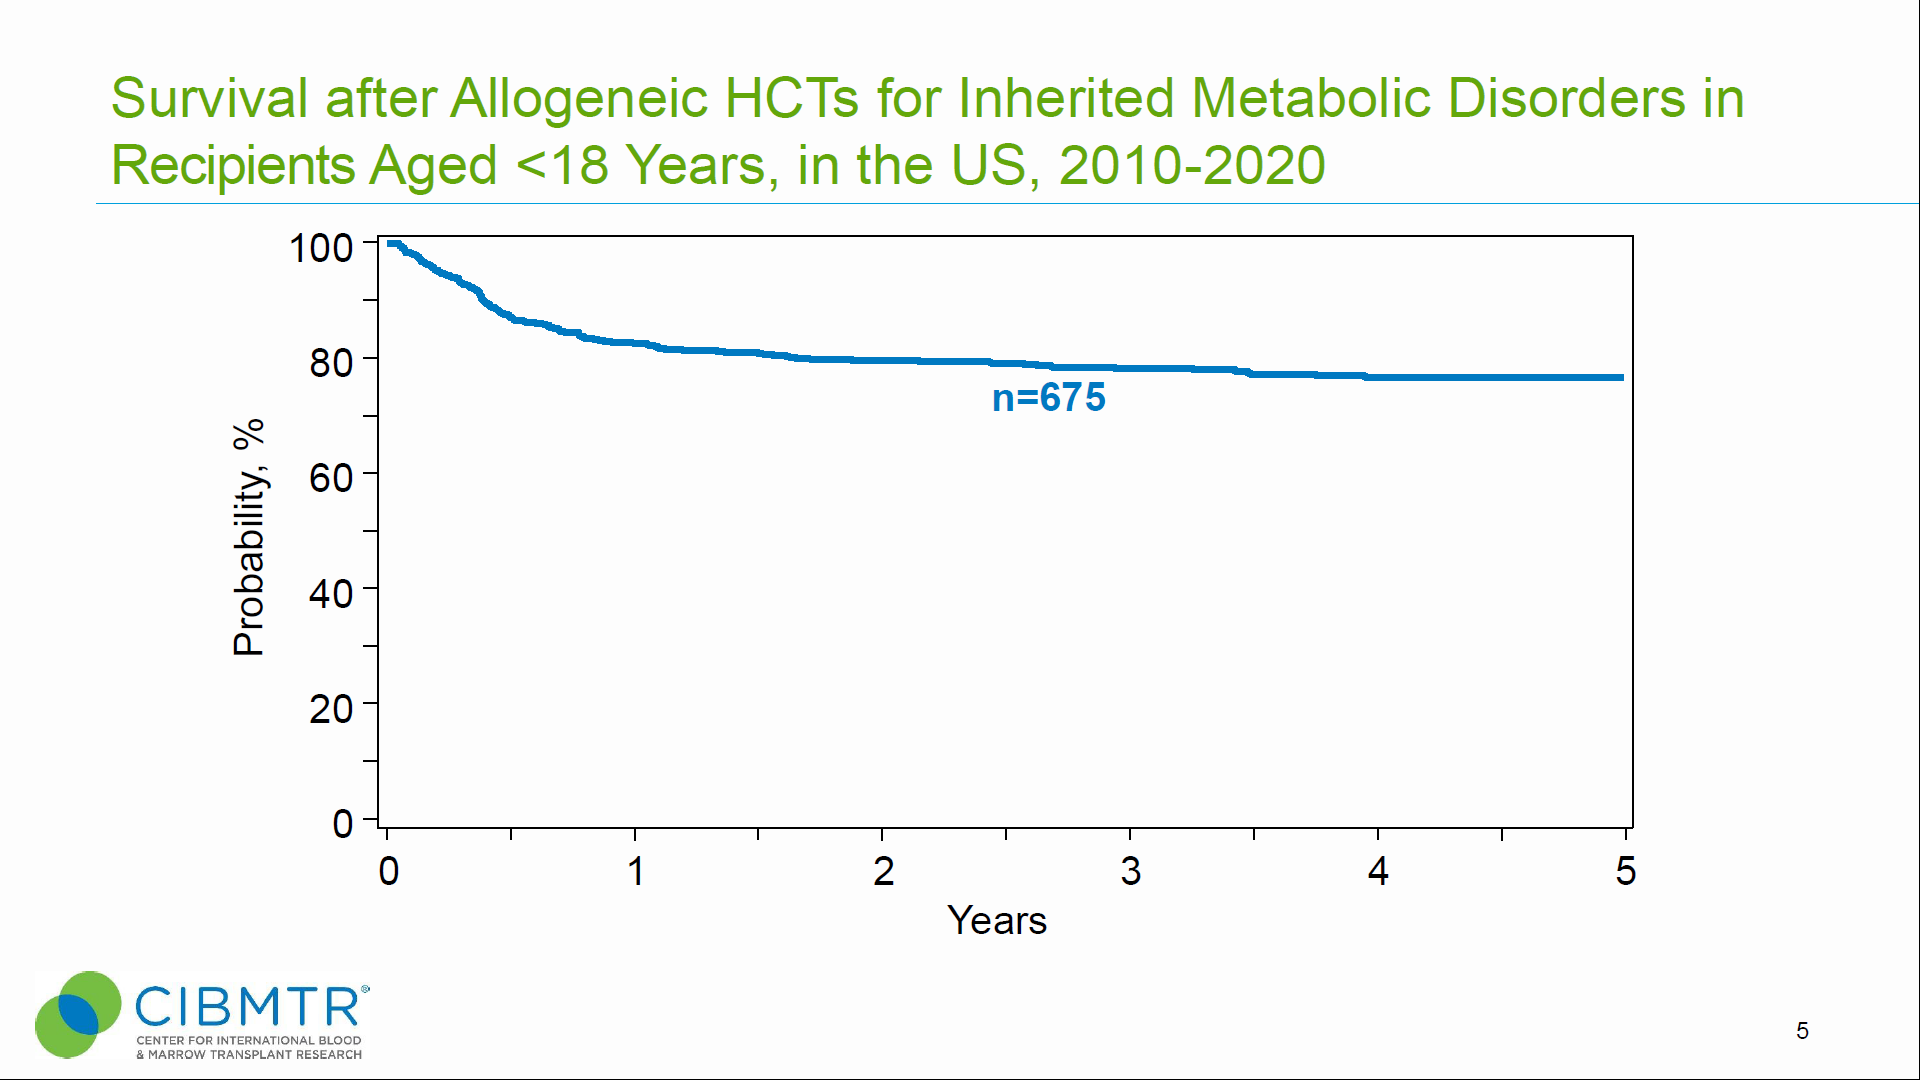 Figure 1 Survival after Allogeneic HCTs for Inherited Metabolic Disorders